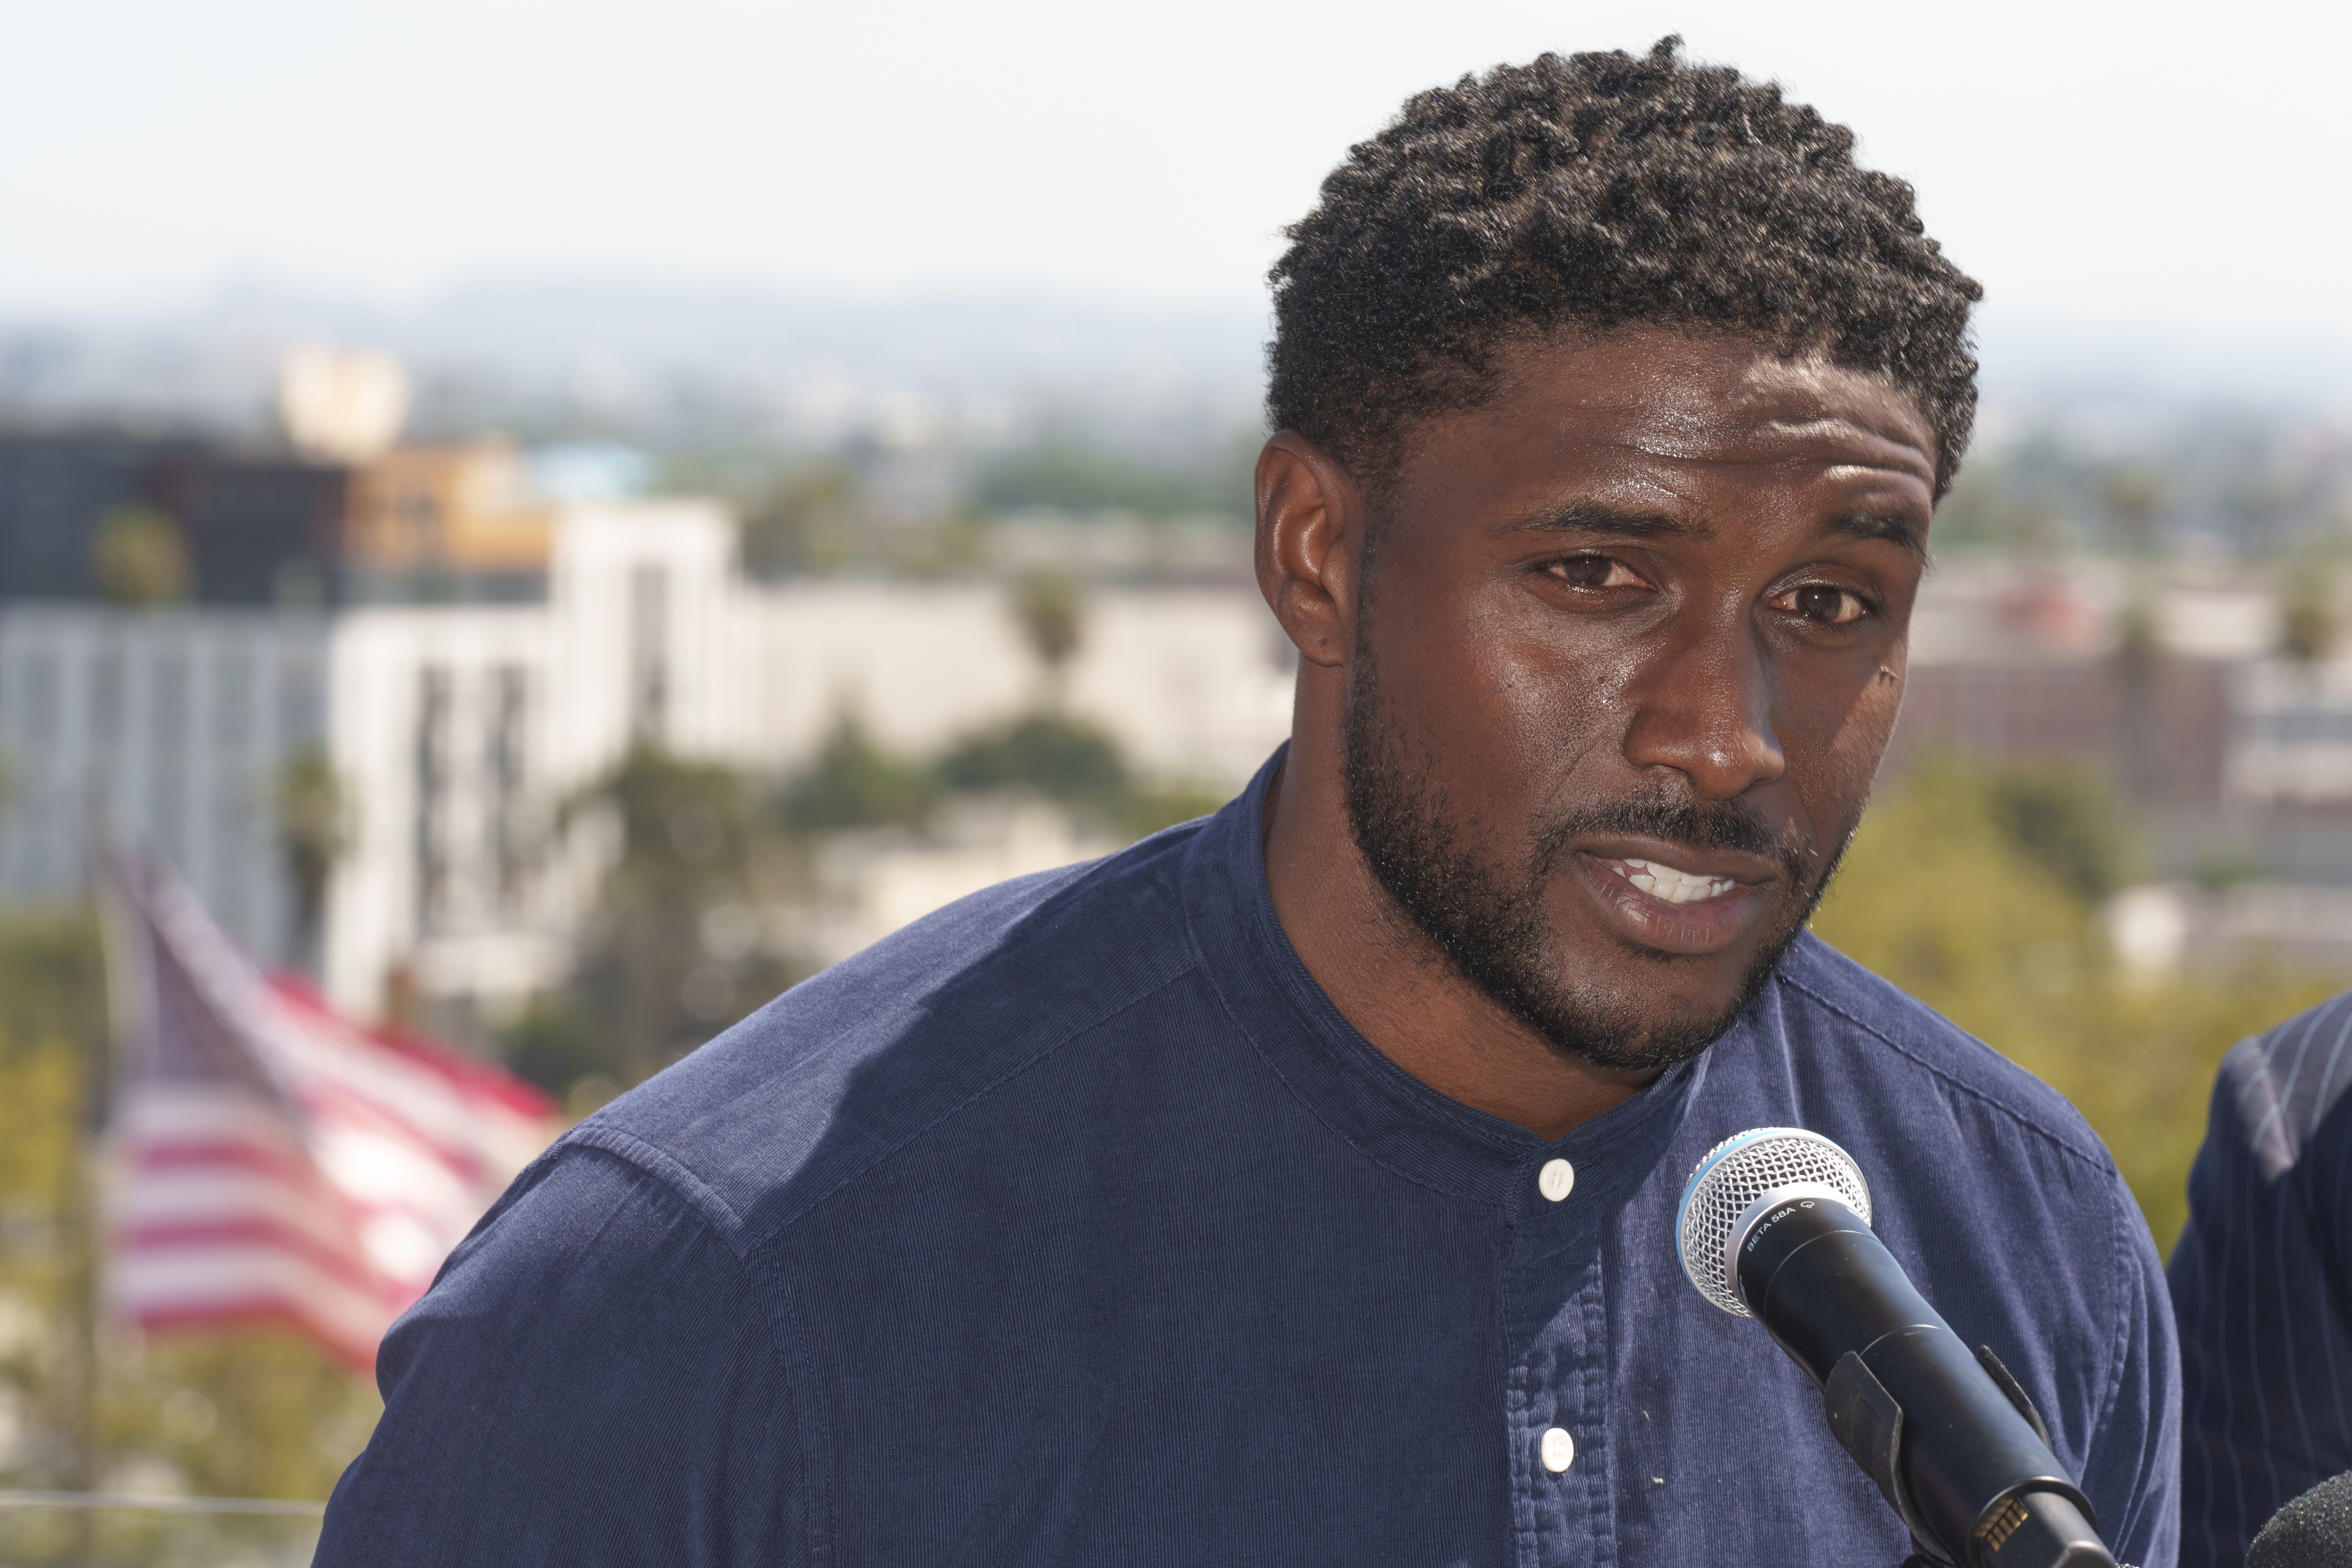 Reggie Bush on Stepping Back from NFL and Focusing on Family